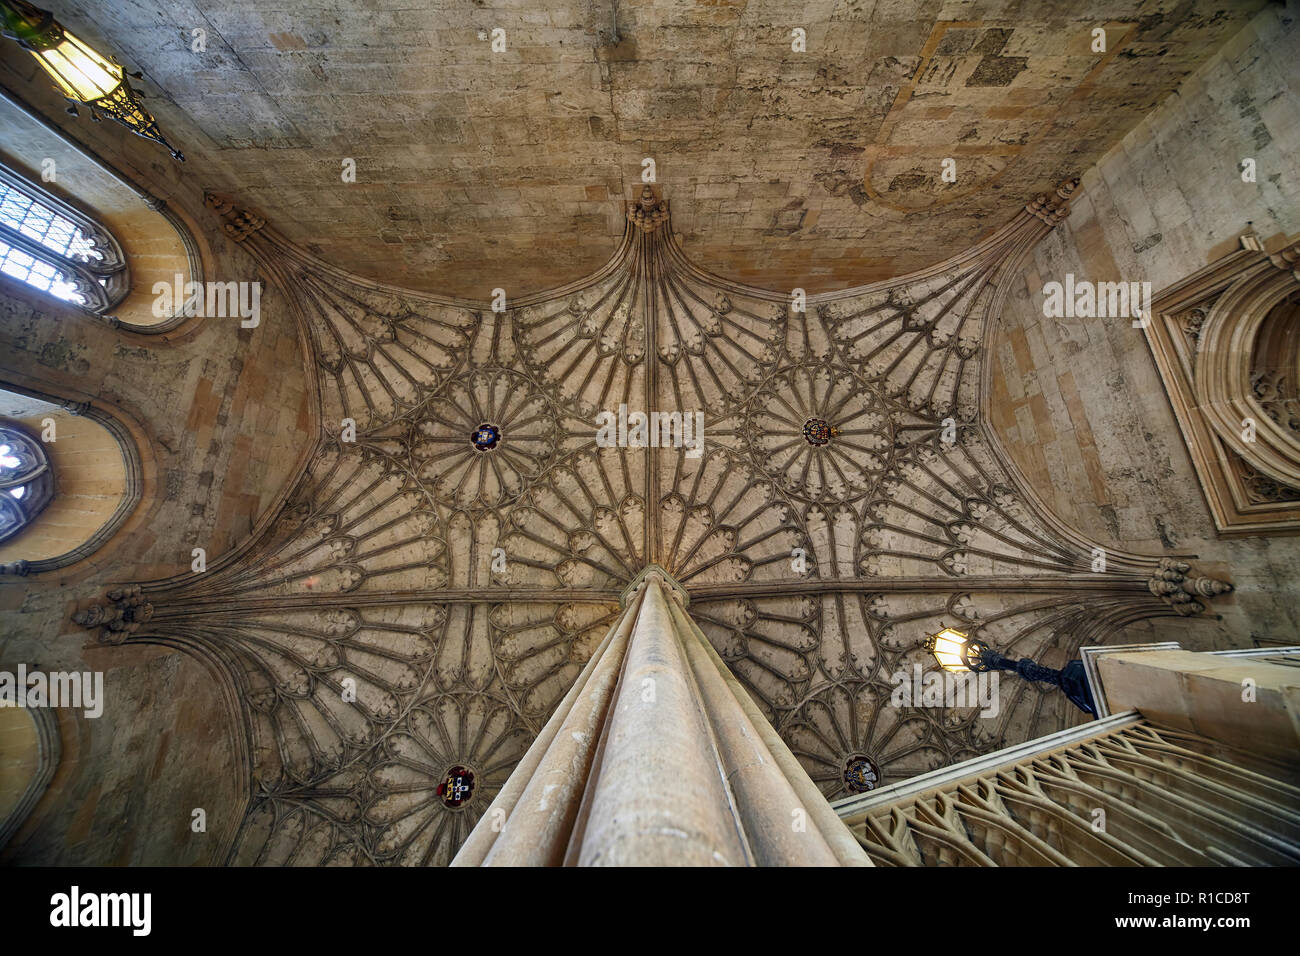 OXFORD, ENGLAND - MAY 15, 2009: The fanned vaulting of the ceiling over the staircase in Bodley Tower. Christ Church. Oxford University. England Stock Photo